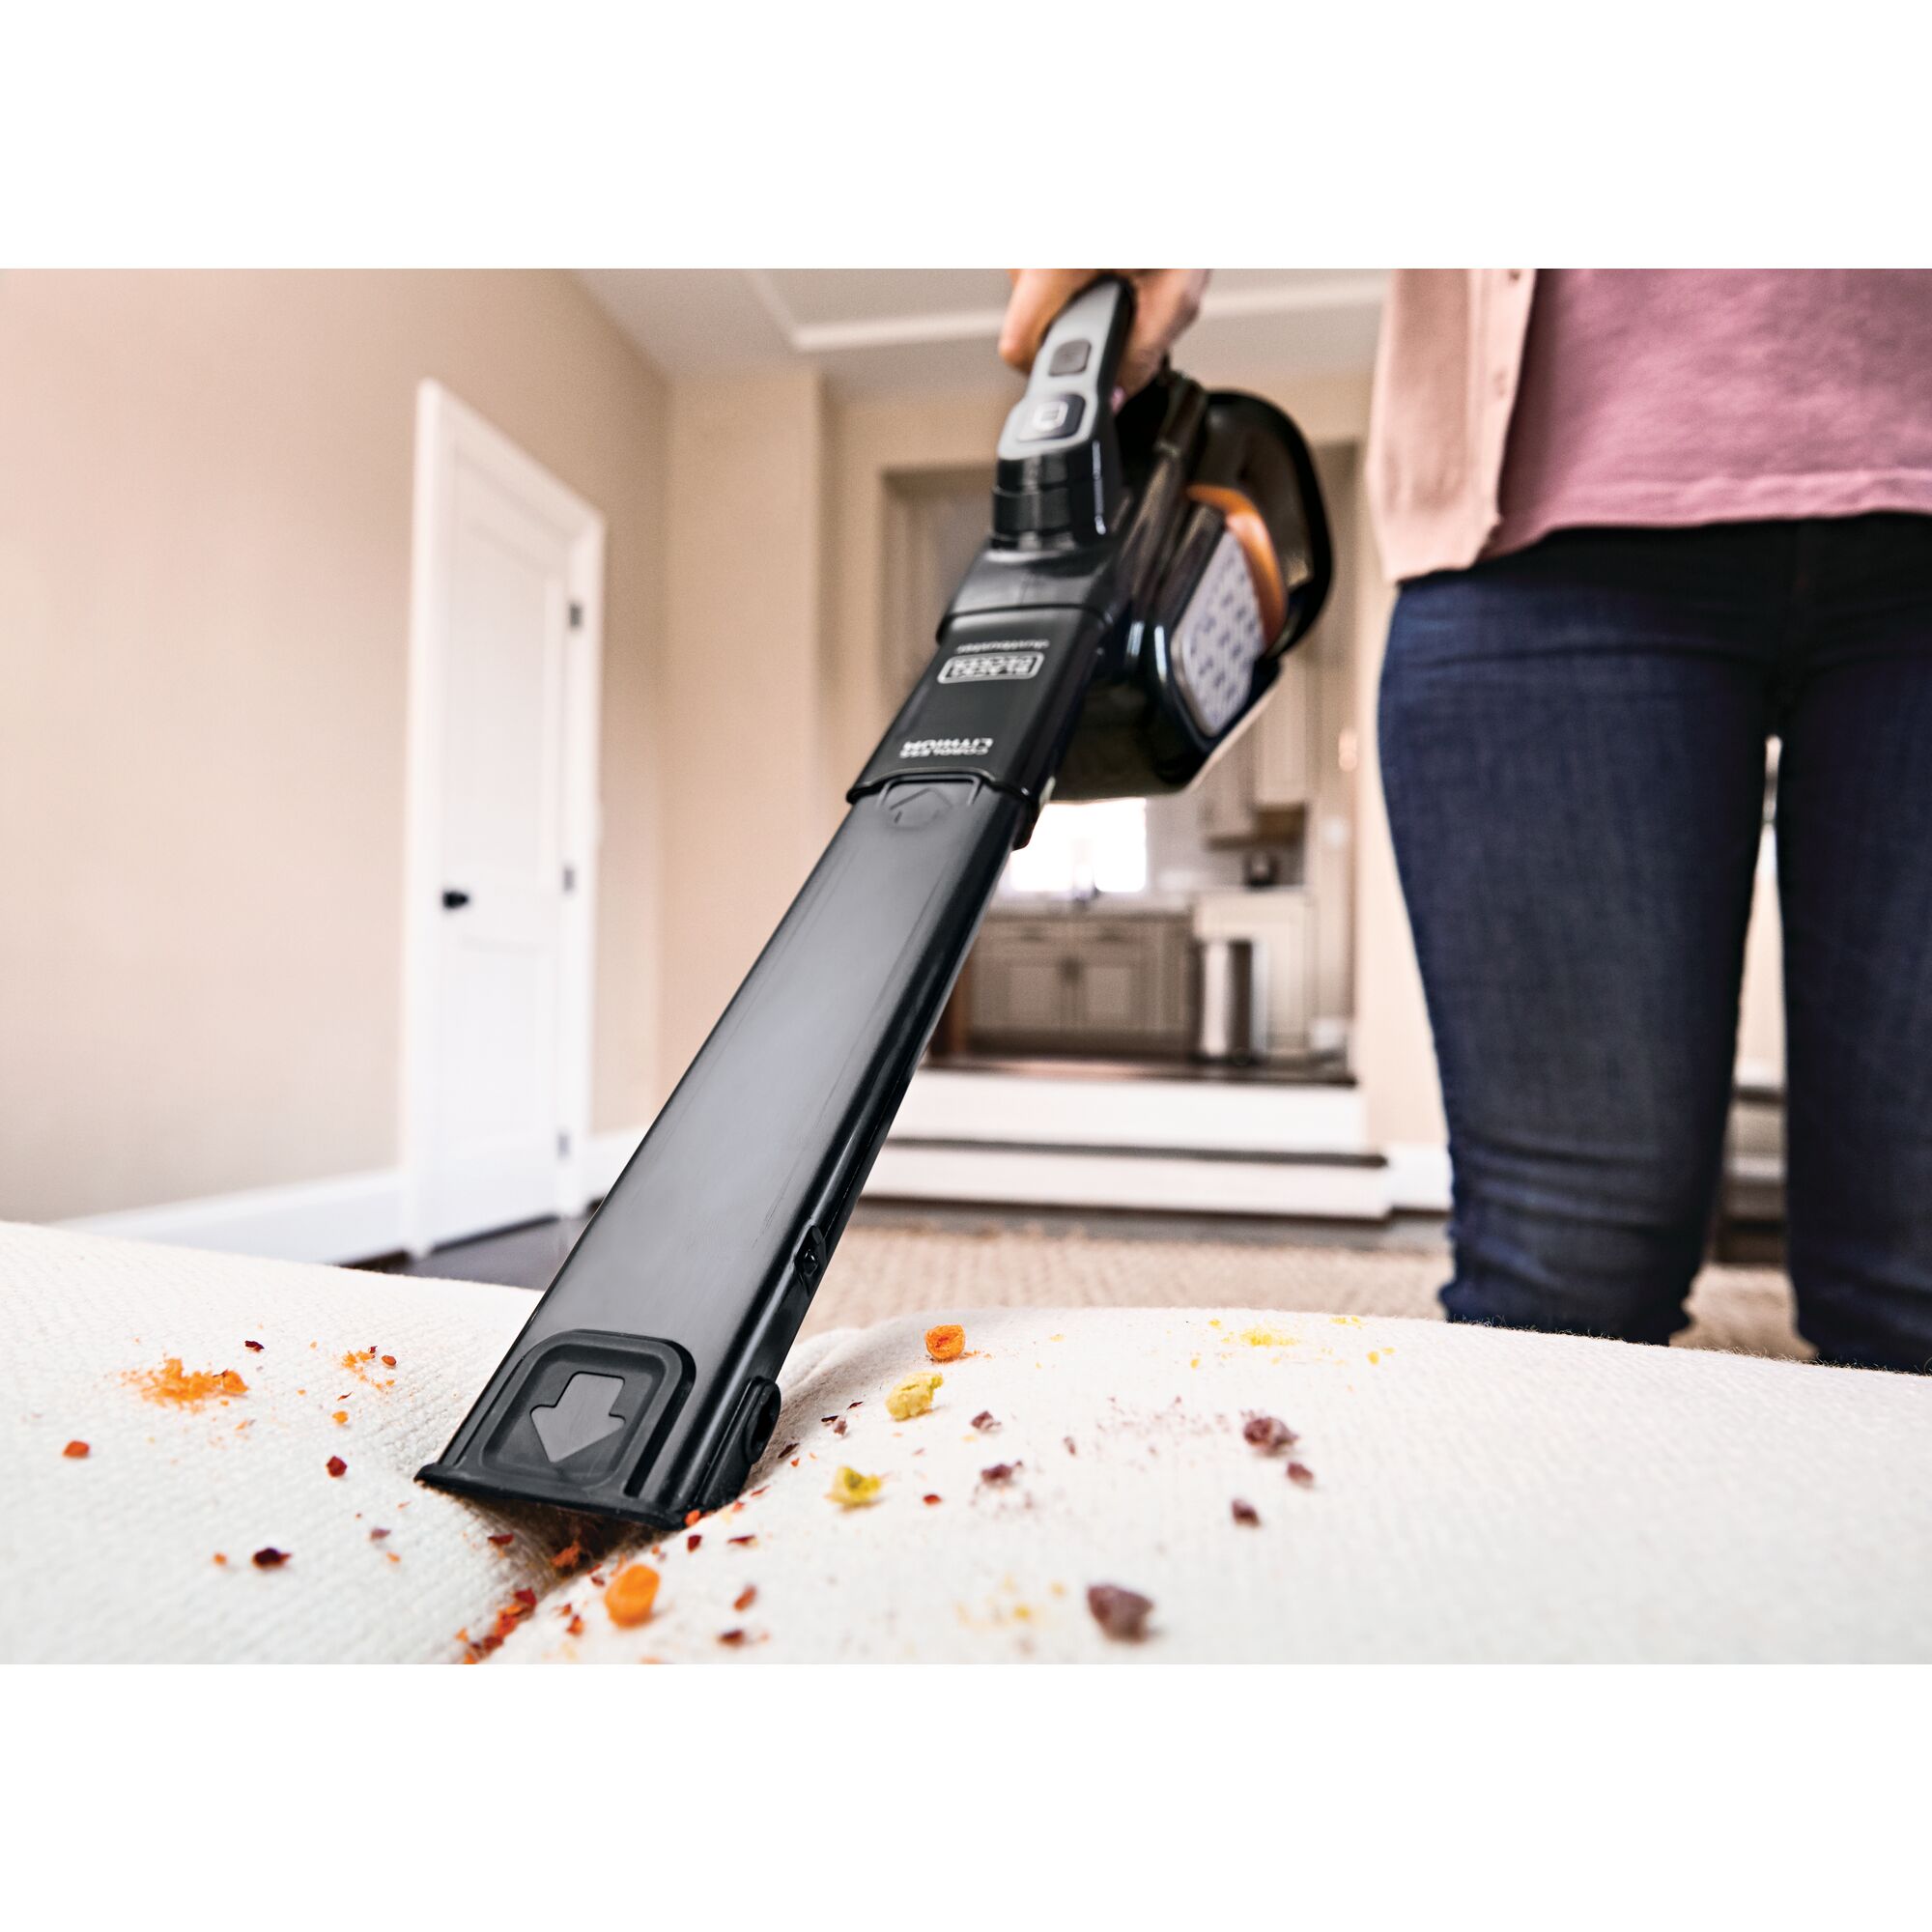 MAX Dustbuster Advanced Clean plus Cordless Hand Vacuum being used to clean messy sofa.